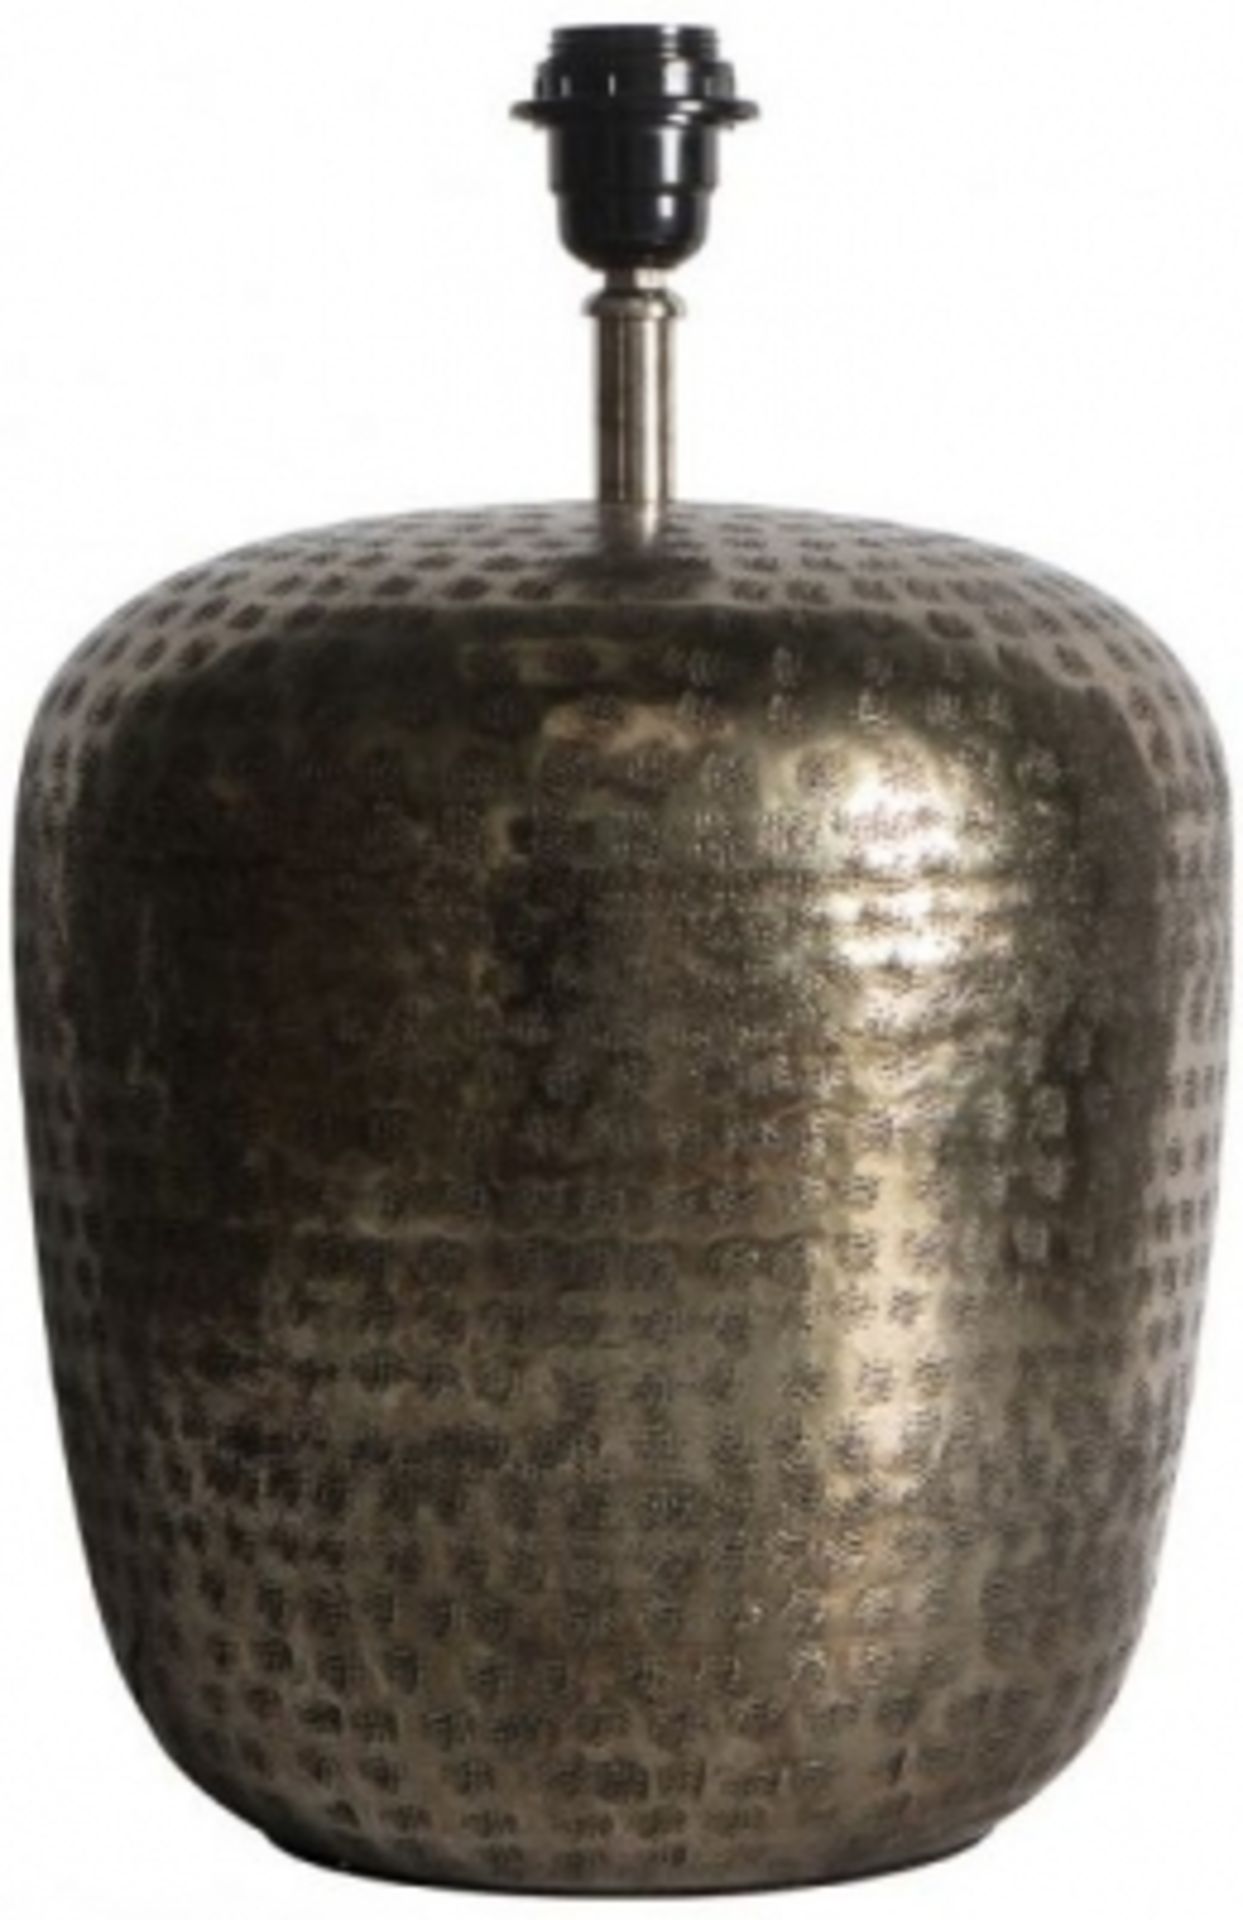 Berlotto Table Lamp Base Only Light up any room in your home with this chic & stylish table lampÃ‚ - Image 2 of 2